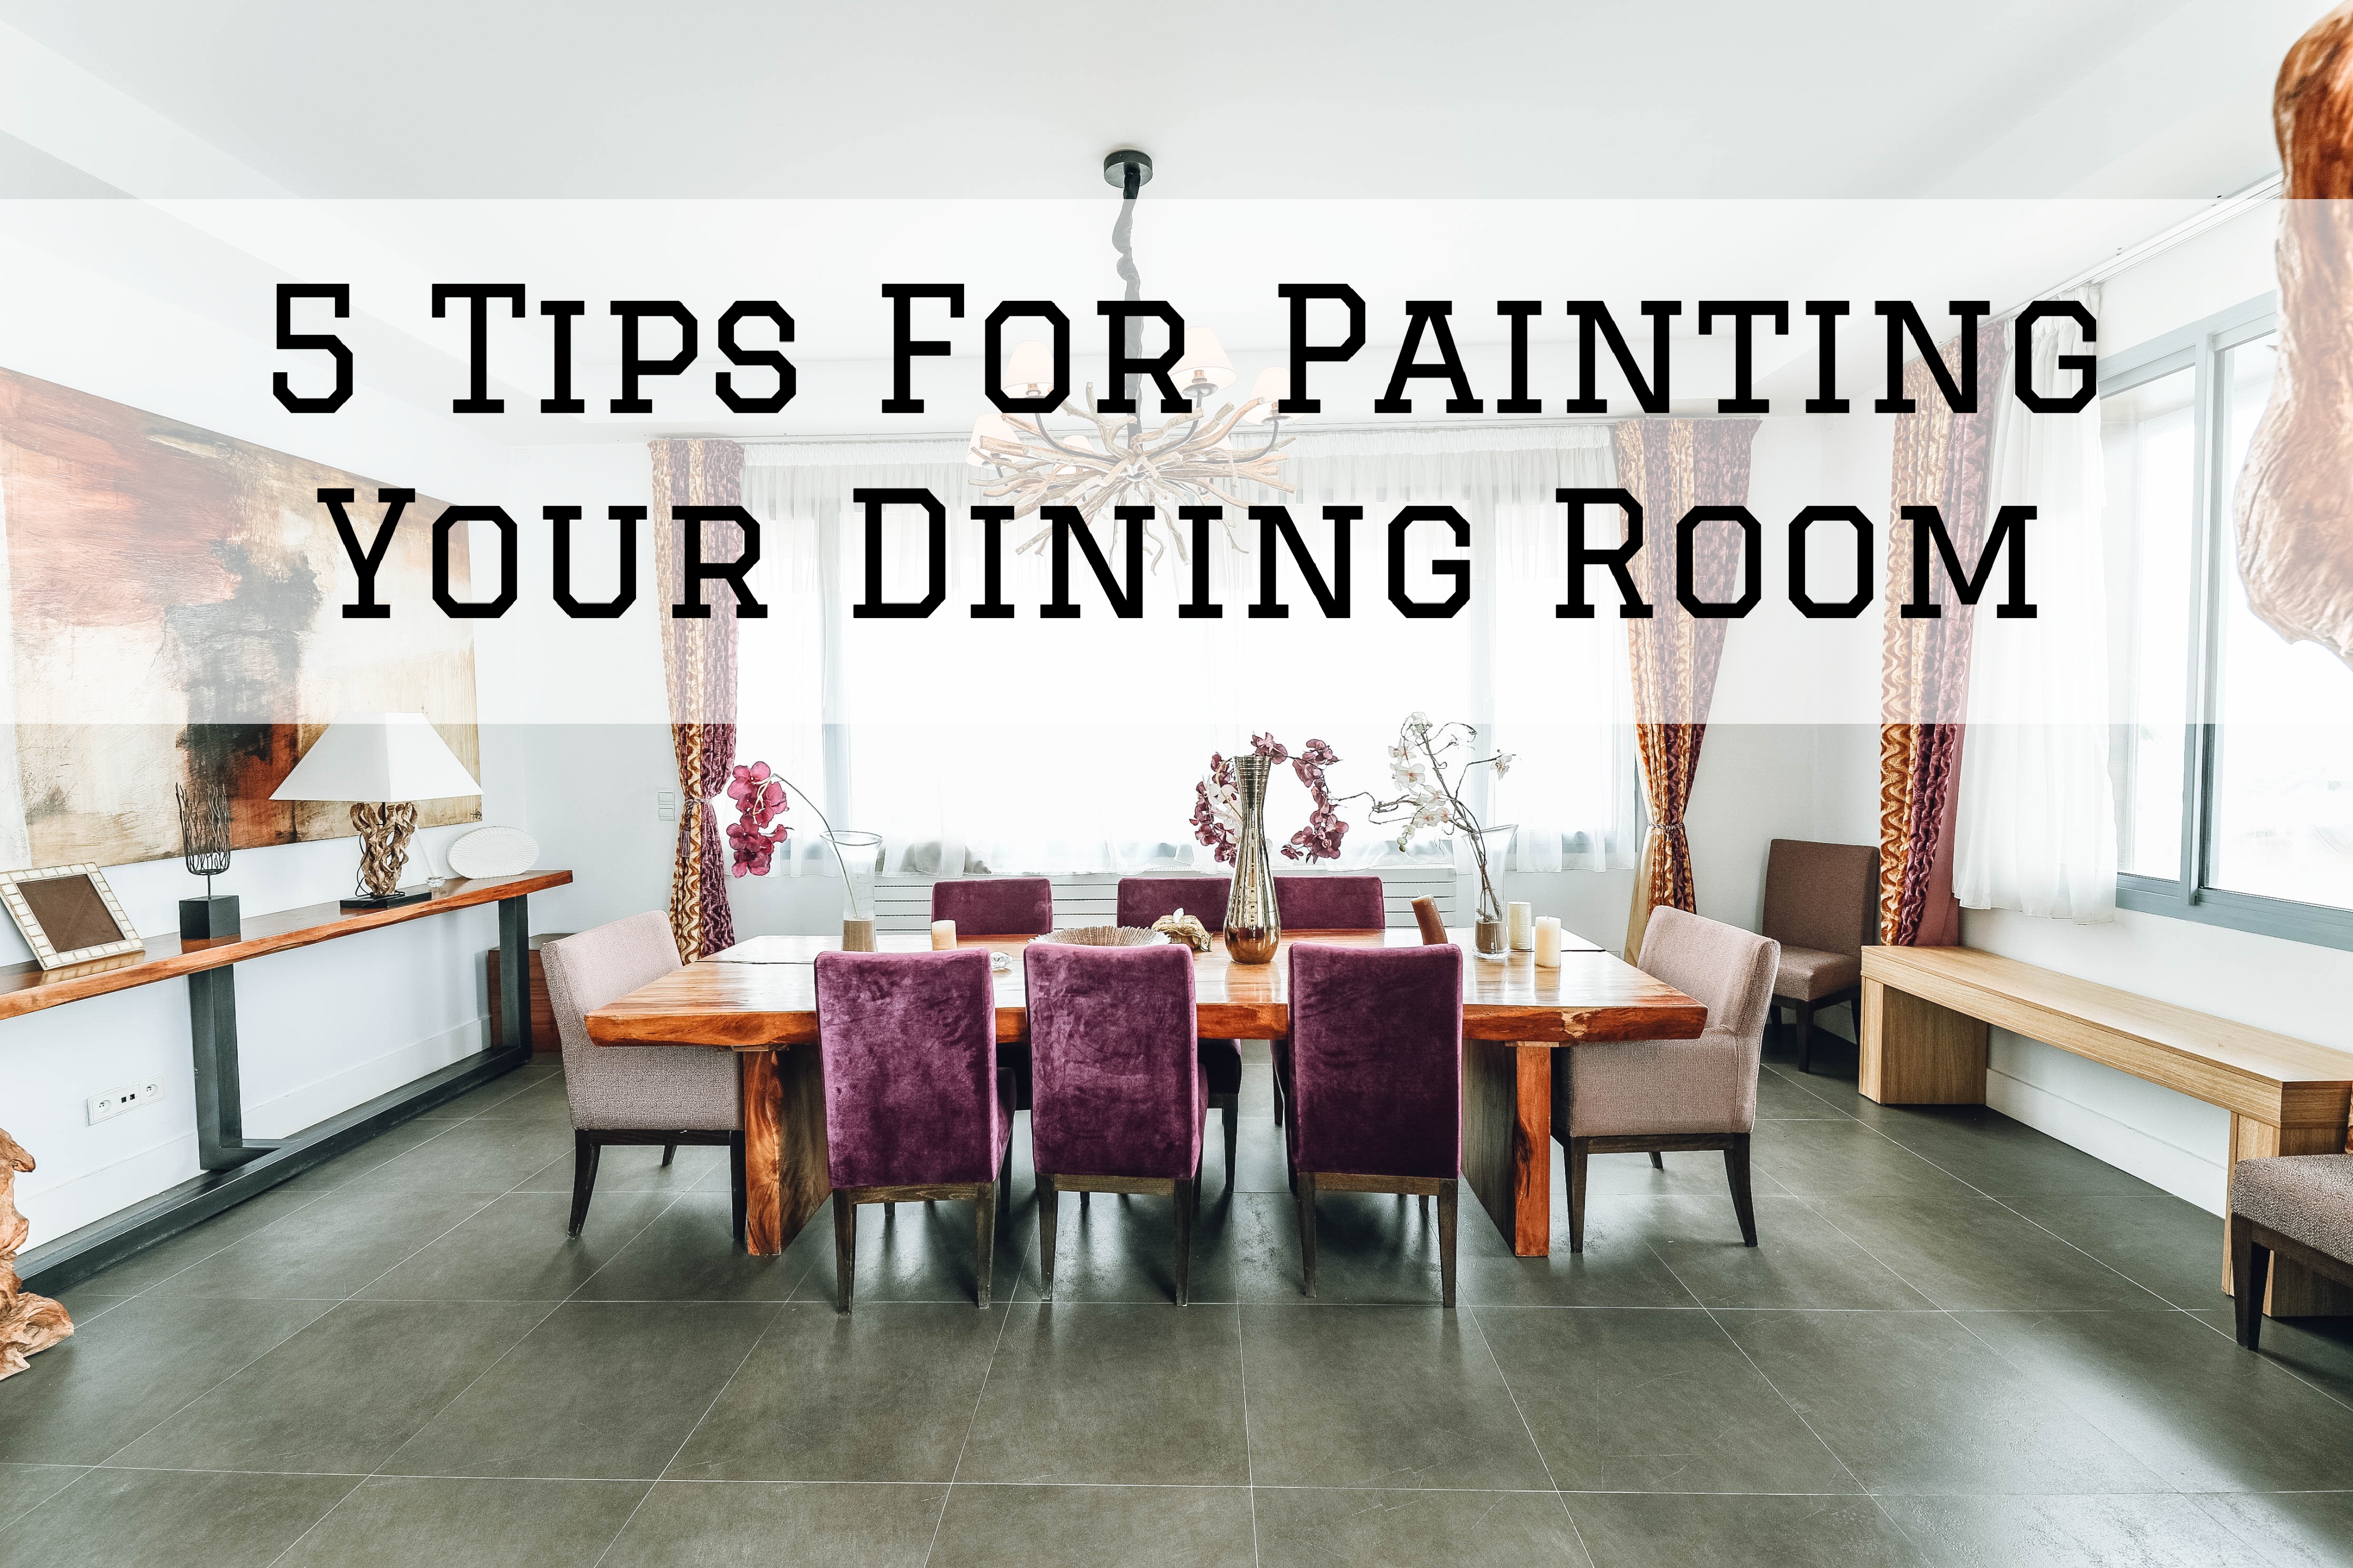 5 Tips For Painting Your Dining Room in Ottawa, Ontario